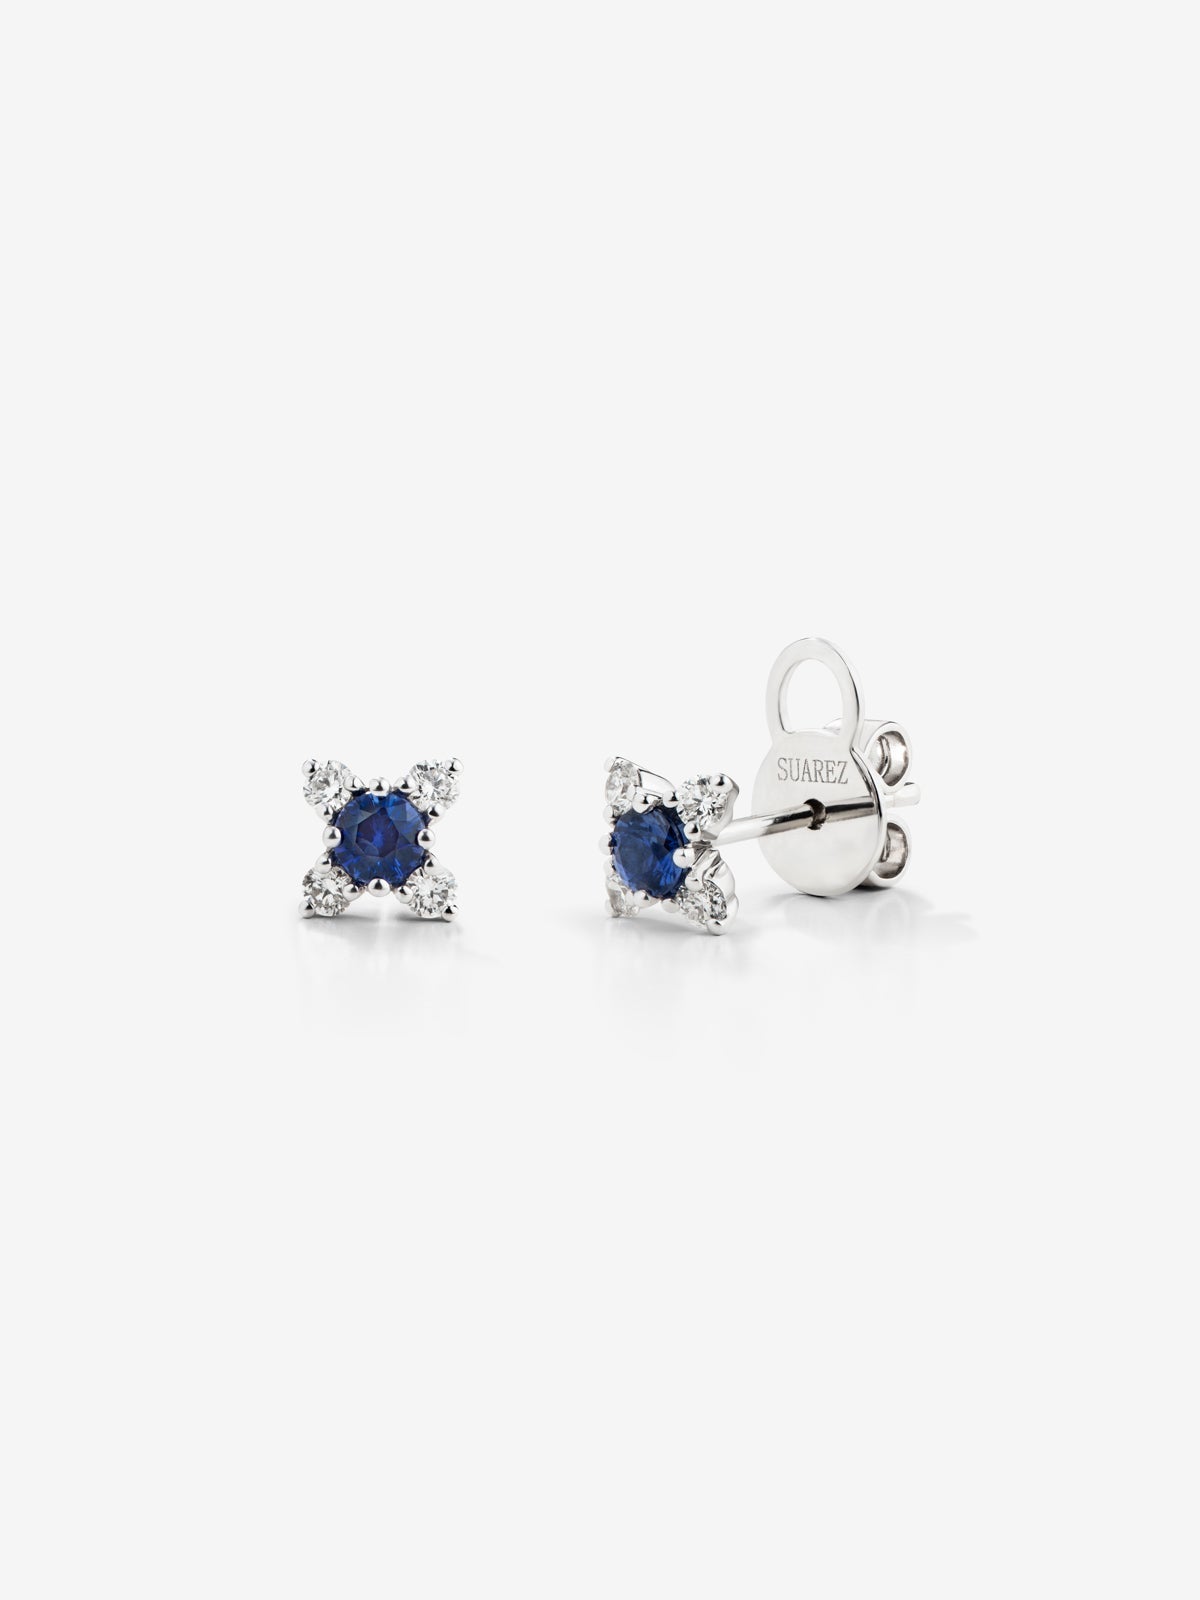 18K white gold hoop earrings with 2 brilliant-cut blue sapphires with a total of 0.26 cts and 8 brilliant-cut diamonds with a total of 0.16 cts